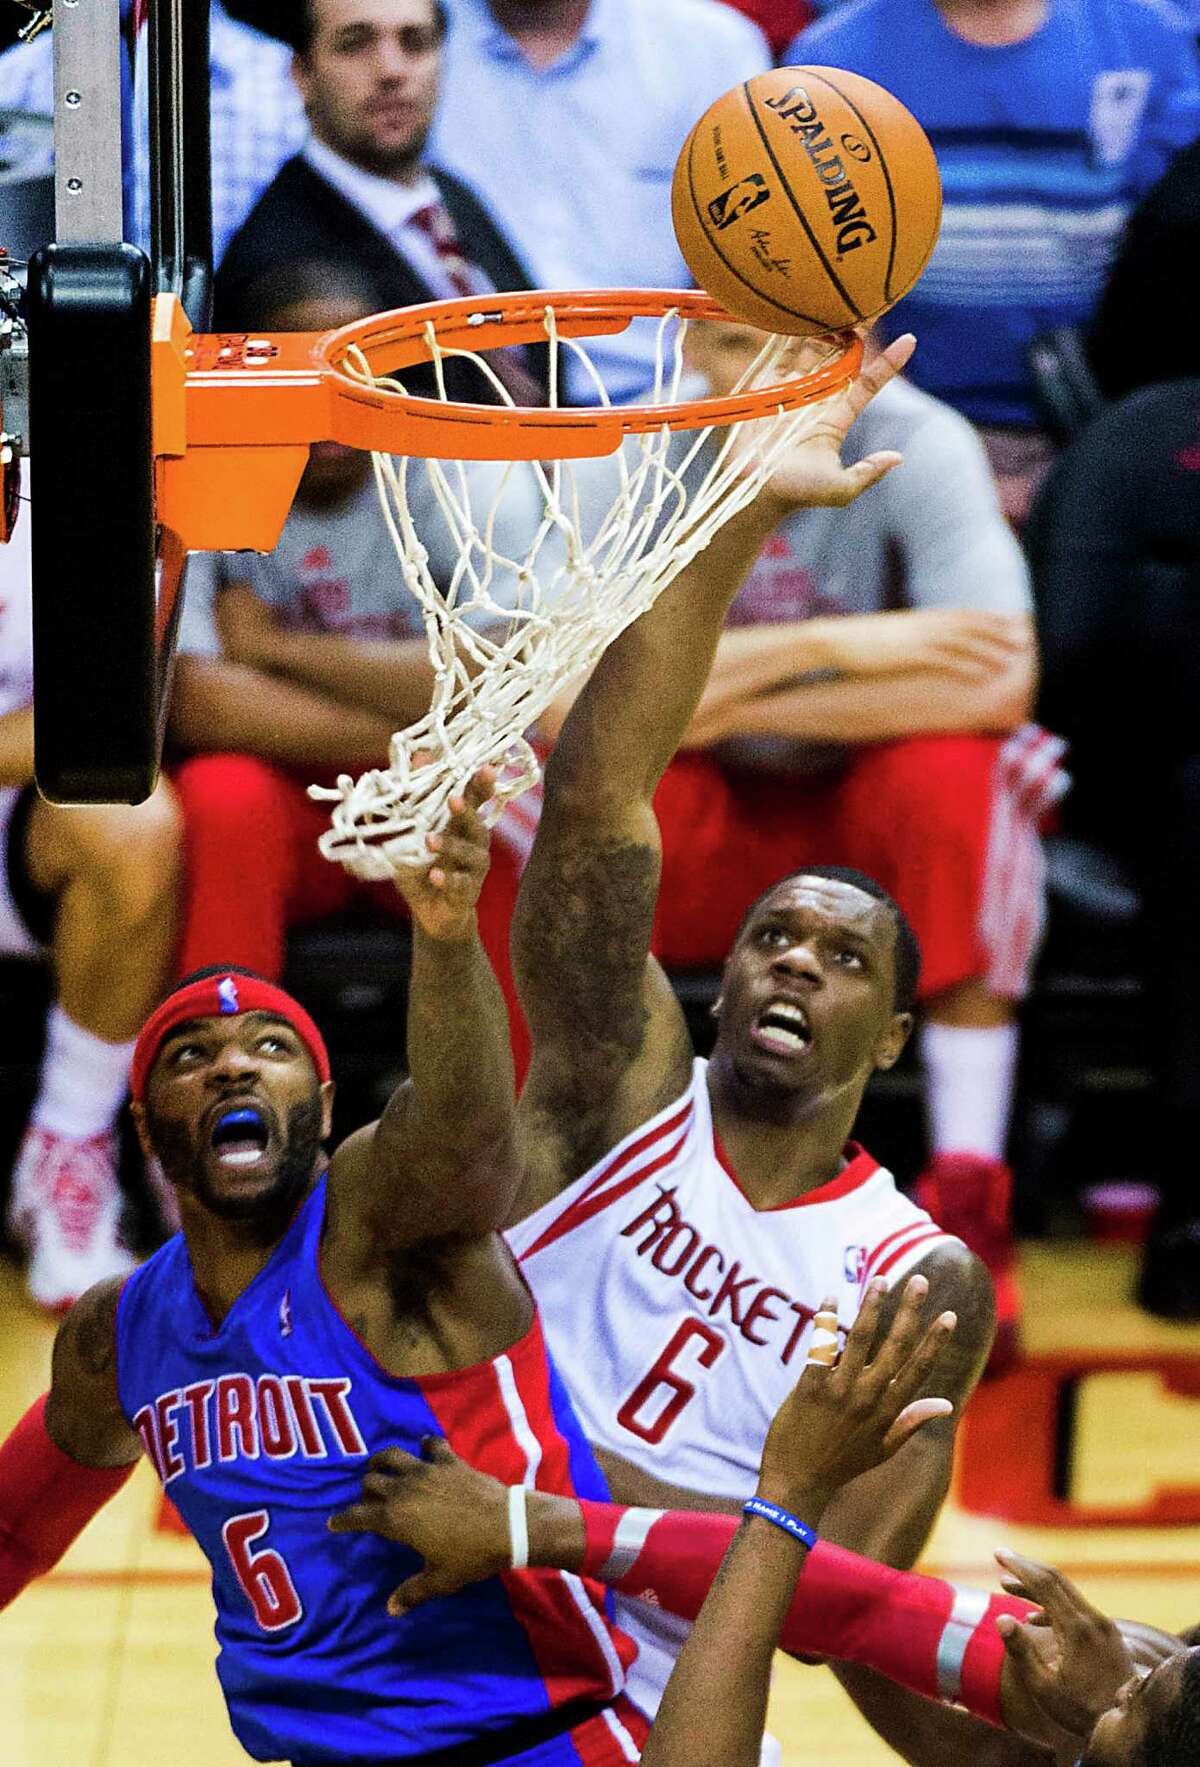 The ball hangs on the rim as Rockets forward Terrence Jones goes up for a tip against Pistons forward Josh Smith, who is nearly entangled in the net.